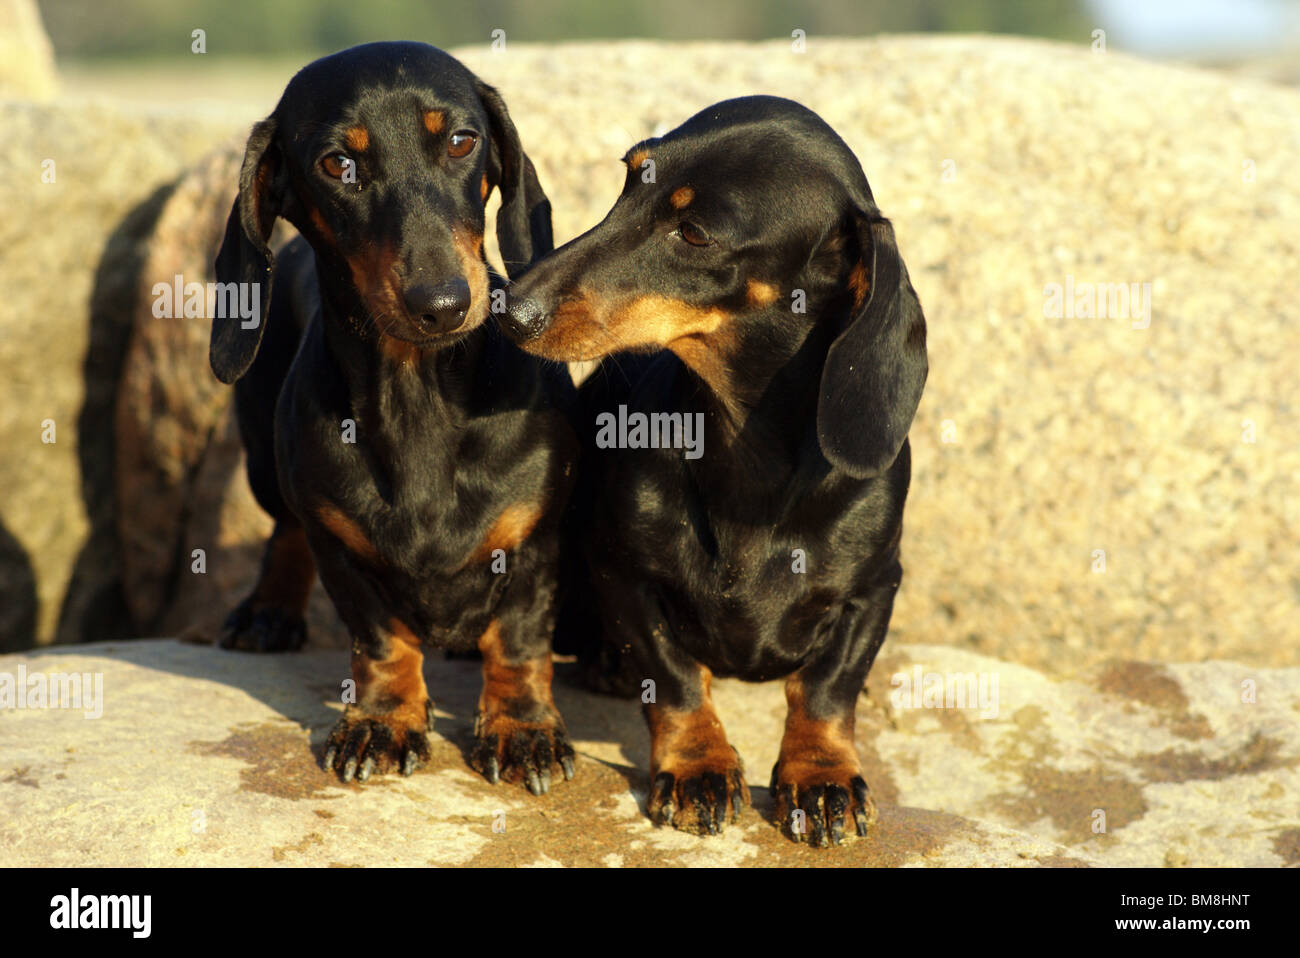 Two Dachshunds. Stock Photo